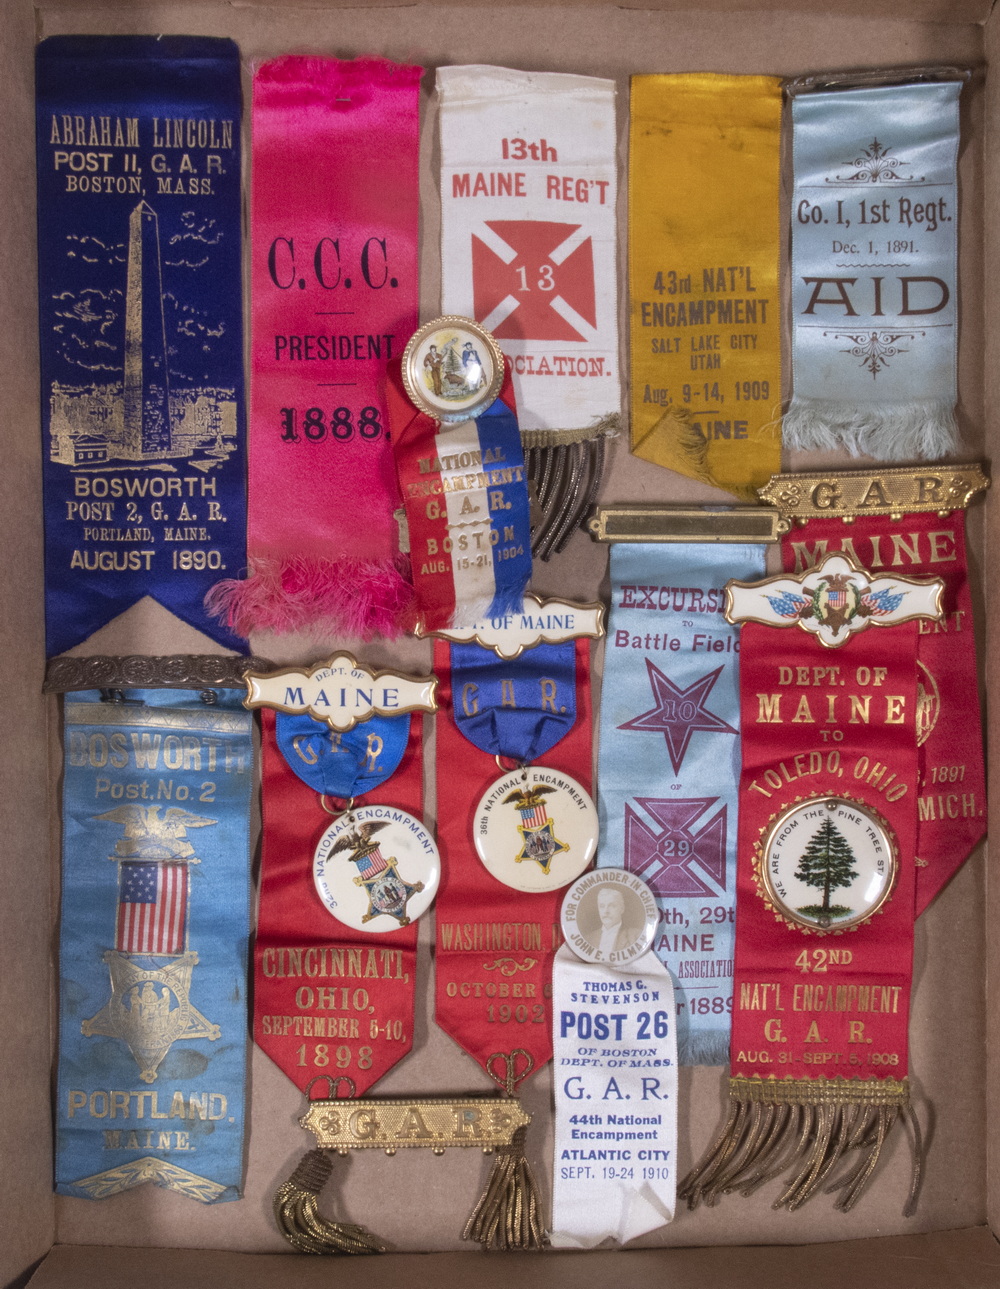 G.A.R. RIBBON & BADGE COLLECTION